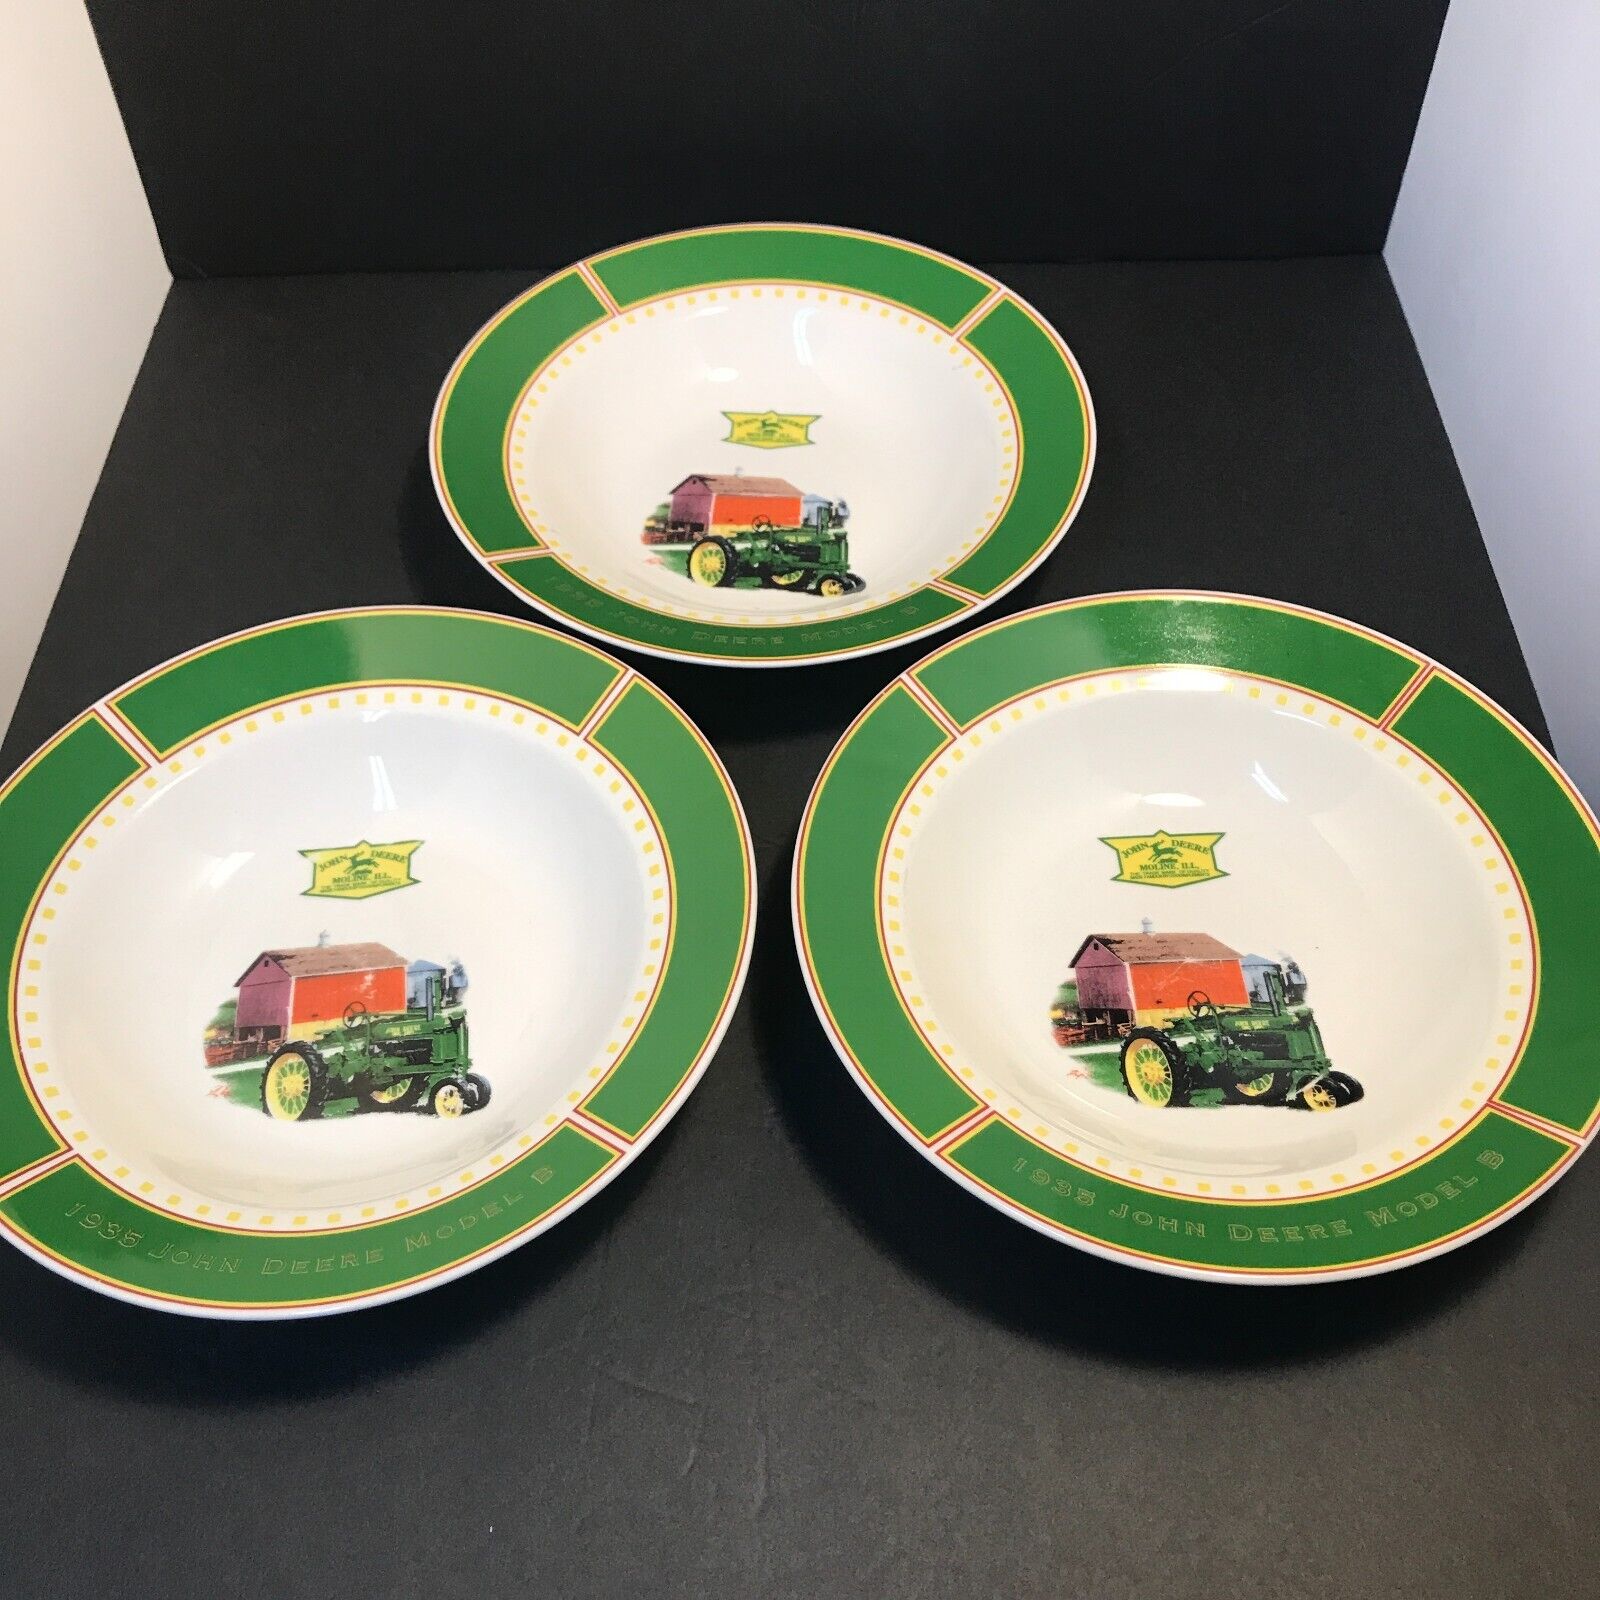 Set Of 3 1935 John Deere Model B Salad Plates By Gibson Pre-Owned READ